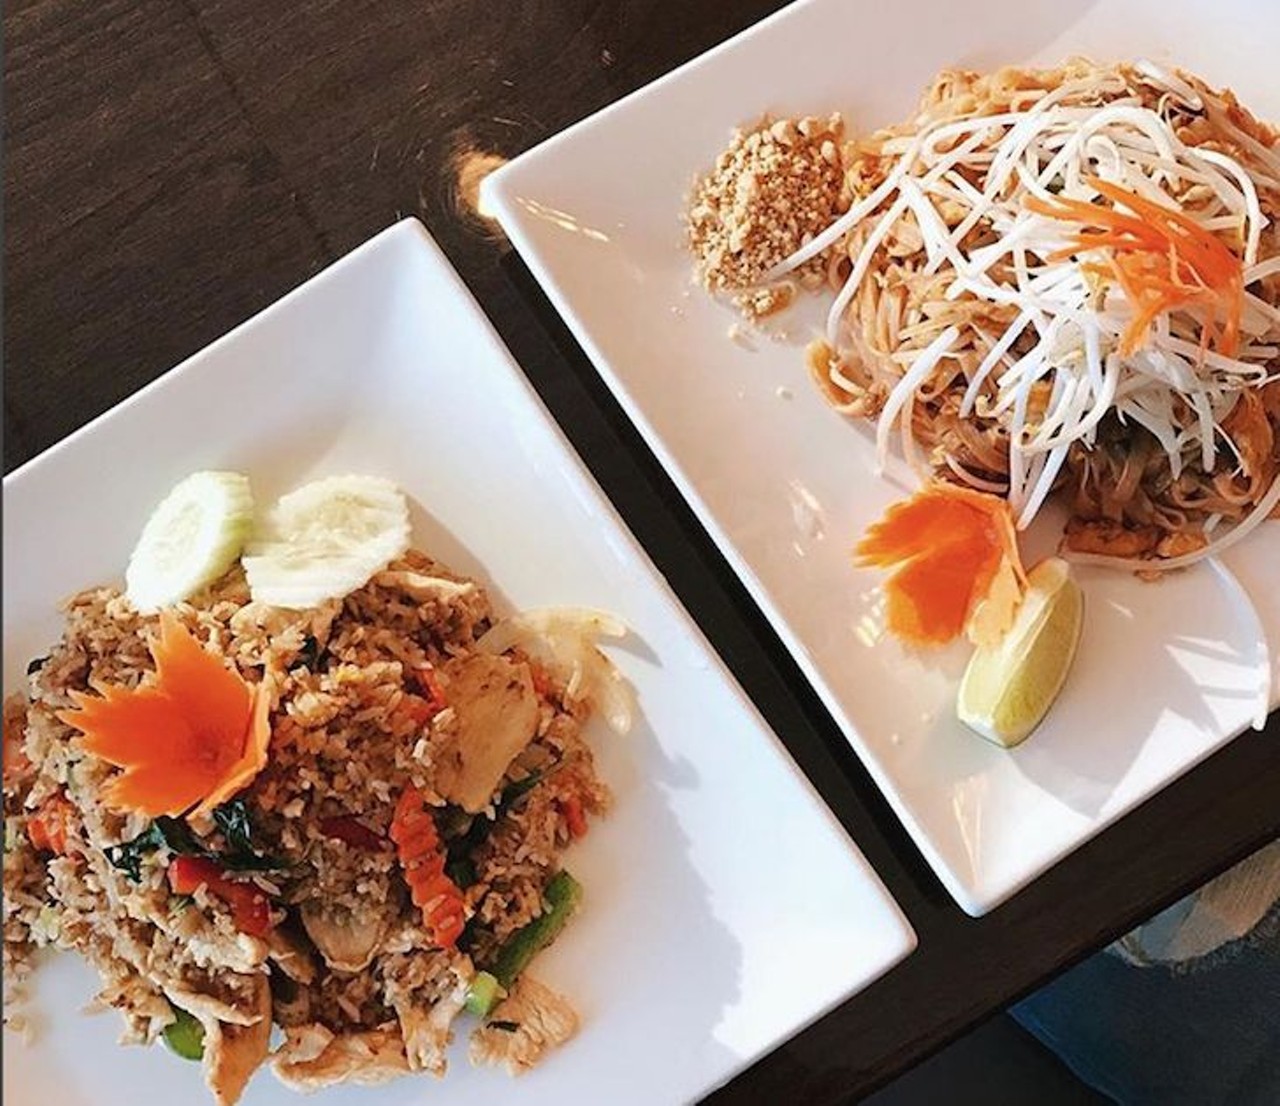 Pop Thai
1227 N Mills Ave., (407) 203-5088
Pop Thai can be known for its reasonable prices and well, noodles. The pad thai and drunken noodles are a staple order for this spot. And you can&#146;t not enjoy a place that makes the food picturesque.
Photo via caathdelacruz/Instagram